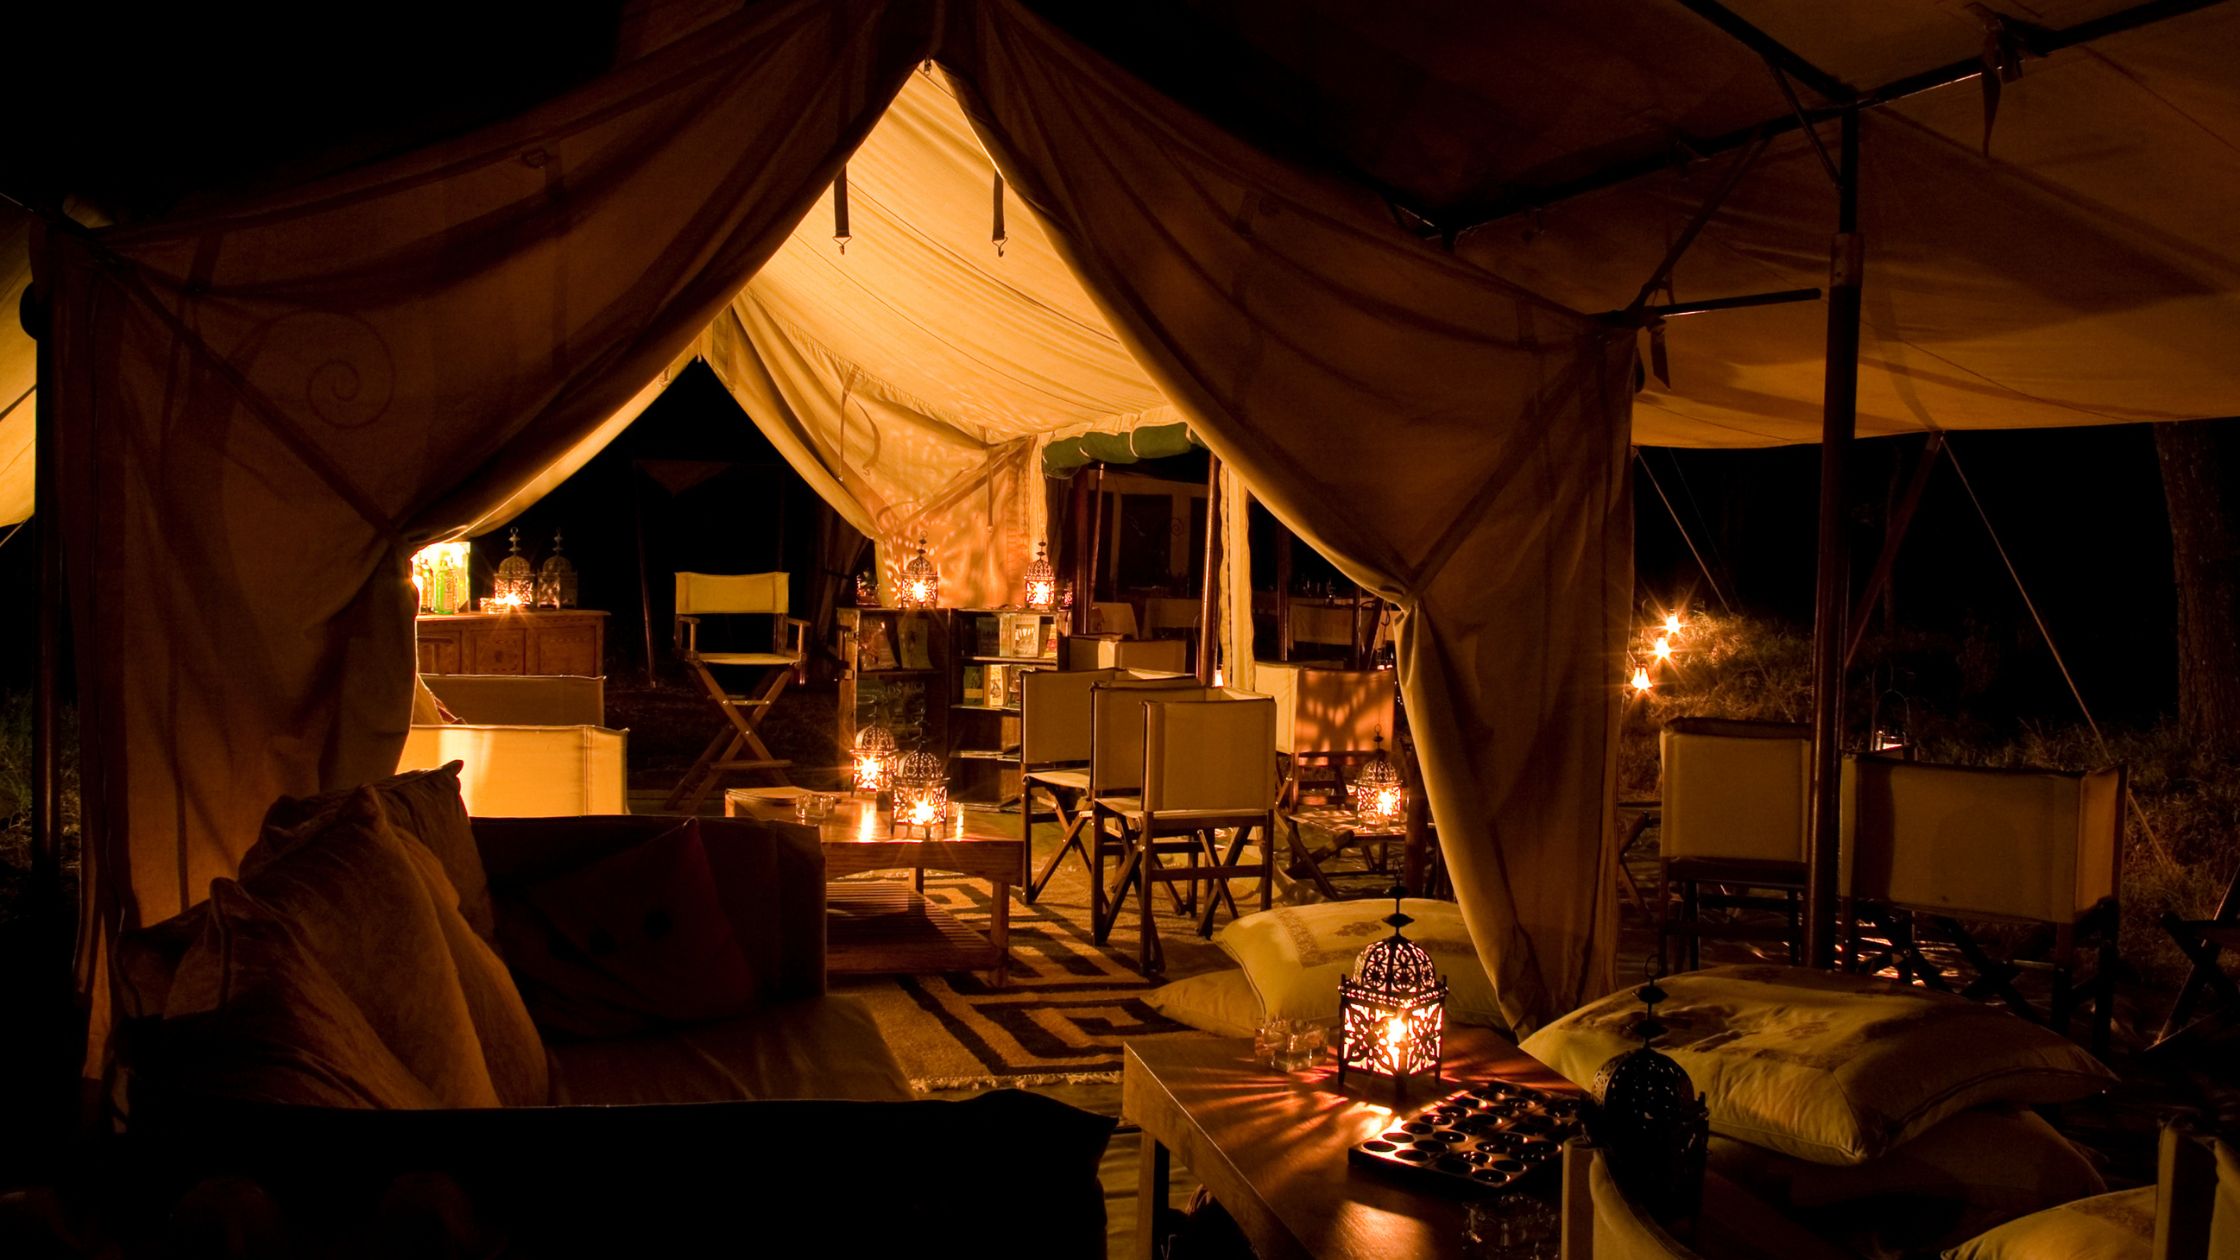 A luxurious tented camp lit by warm lanterns at night, set up for a self-drive safari experience.